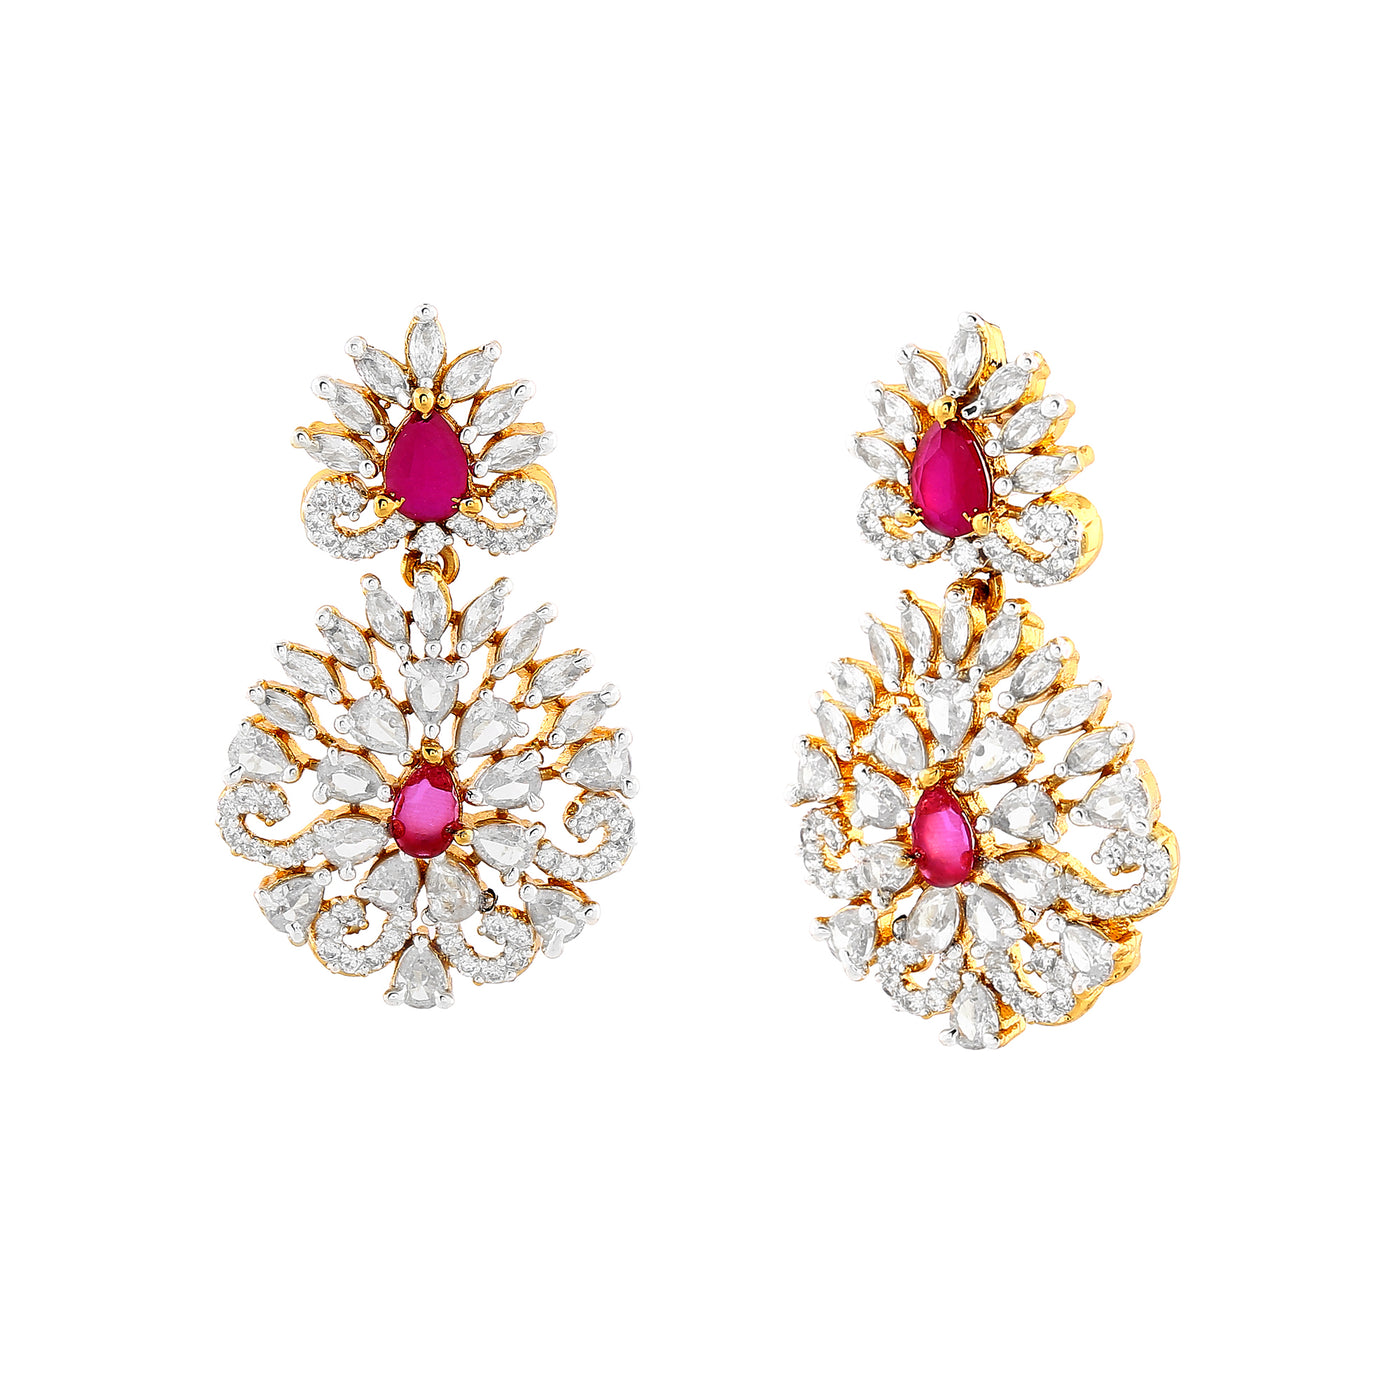 Estele Gold Plated CZ Radiance Flower Designer Earrings with Pink Crystals for Women